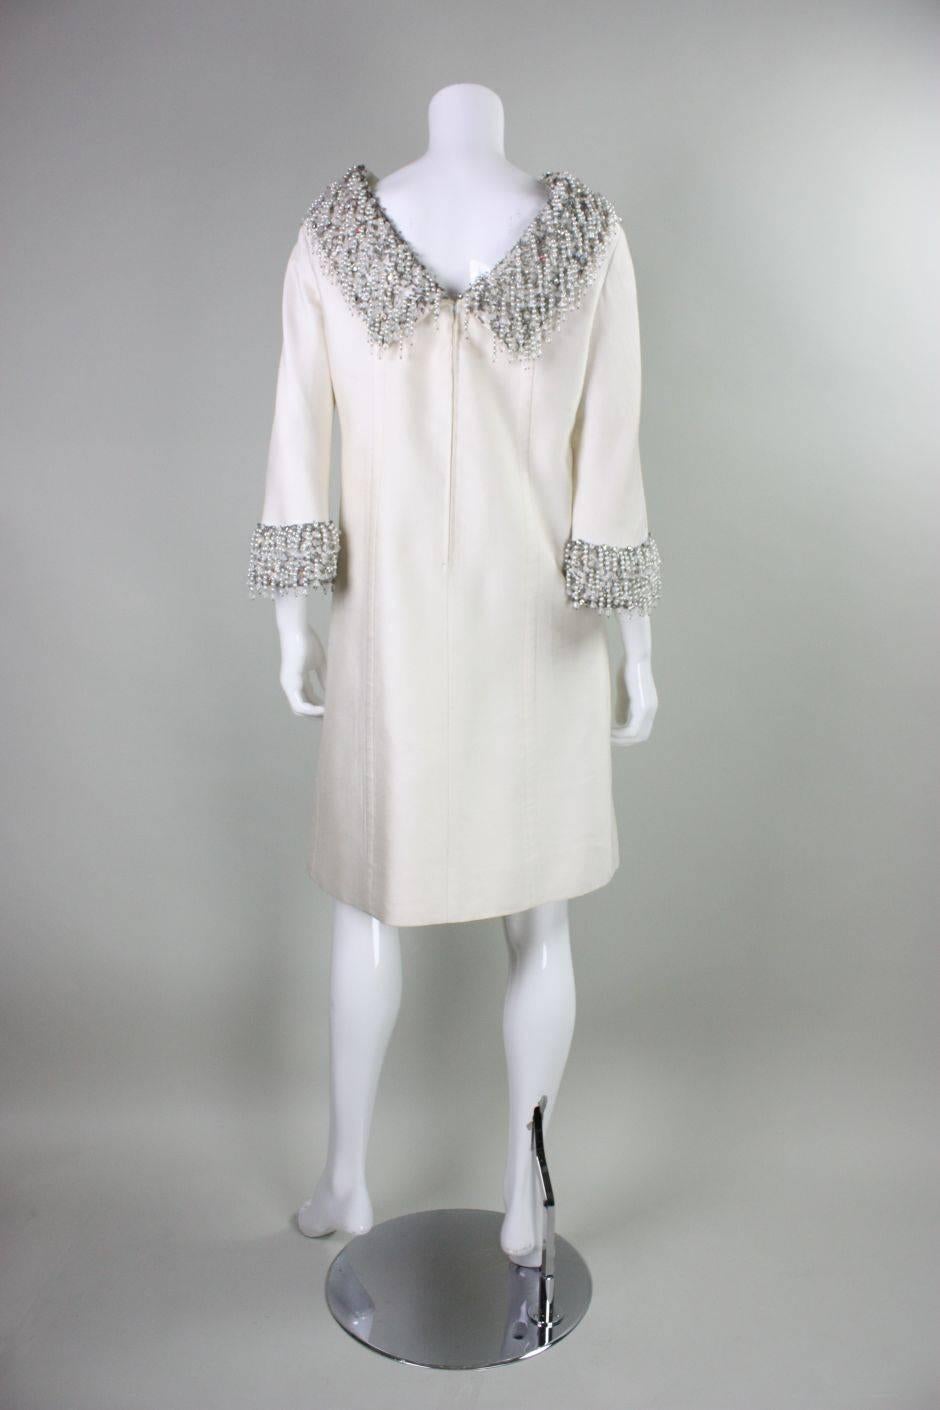 Women's 1960's Cream Cocktail Dress with Heavily Beaded Fringed Trim For Sale